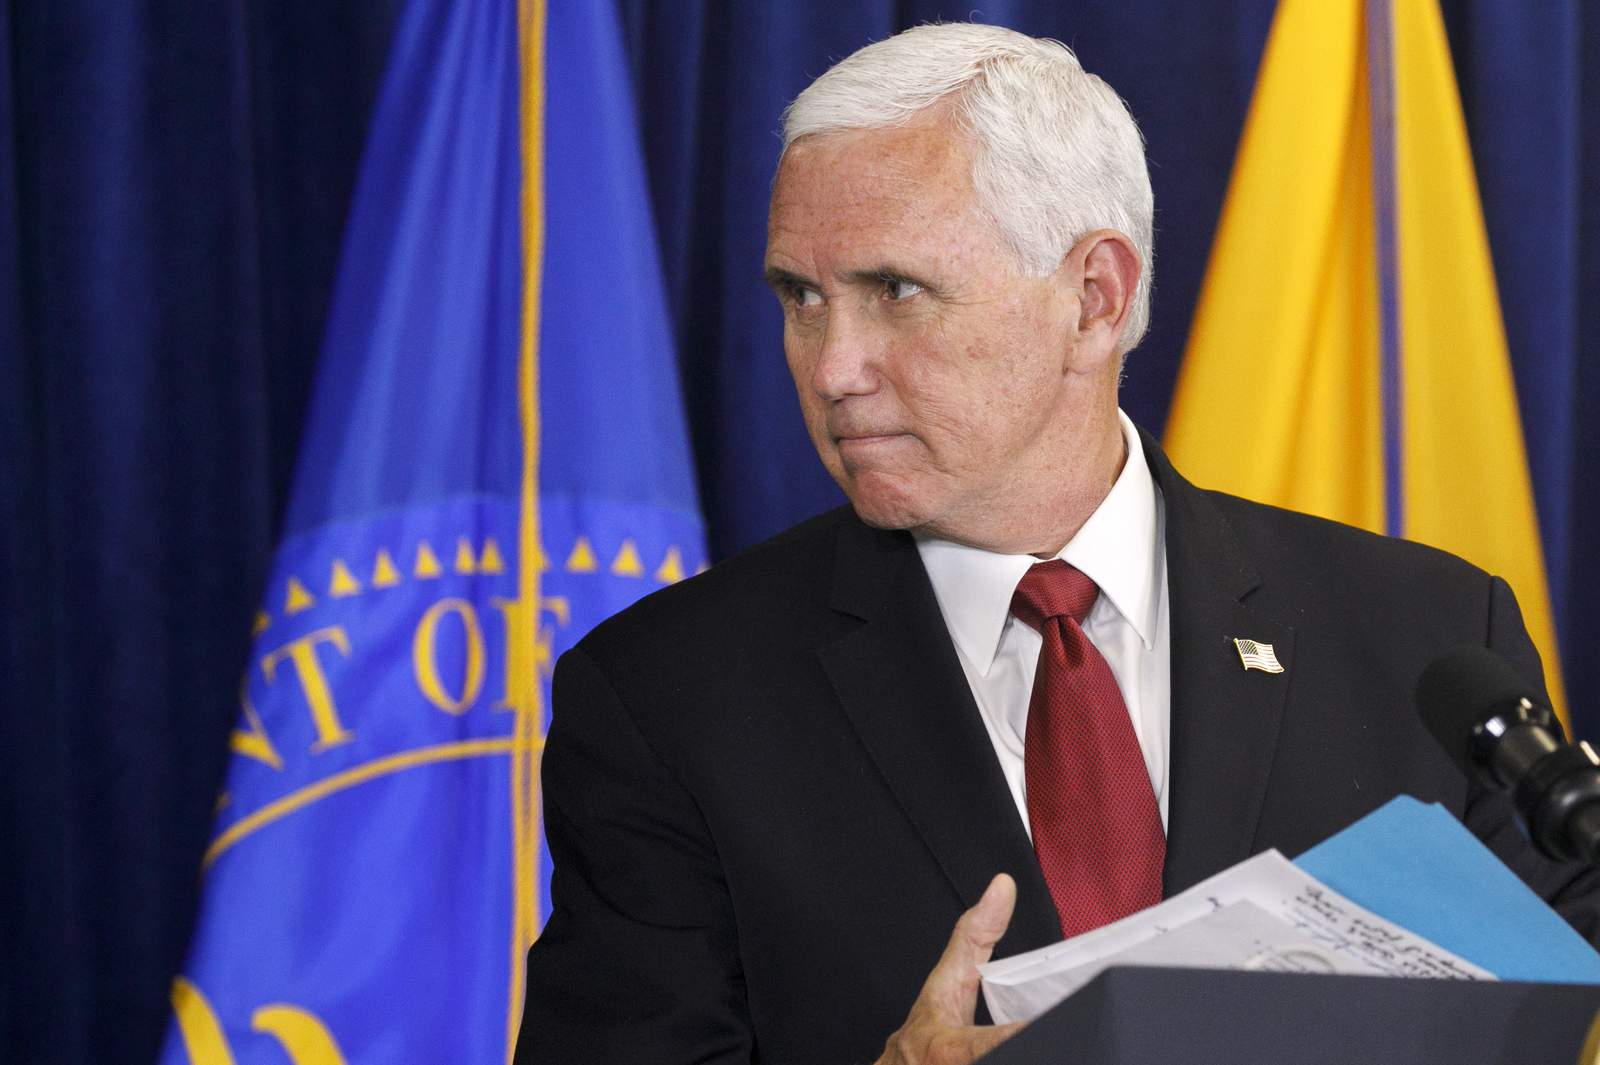 Report shows $480,000 in donations to cover Pence legal aid